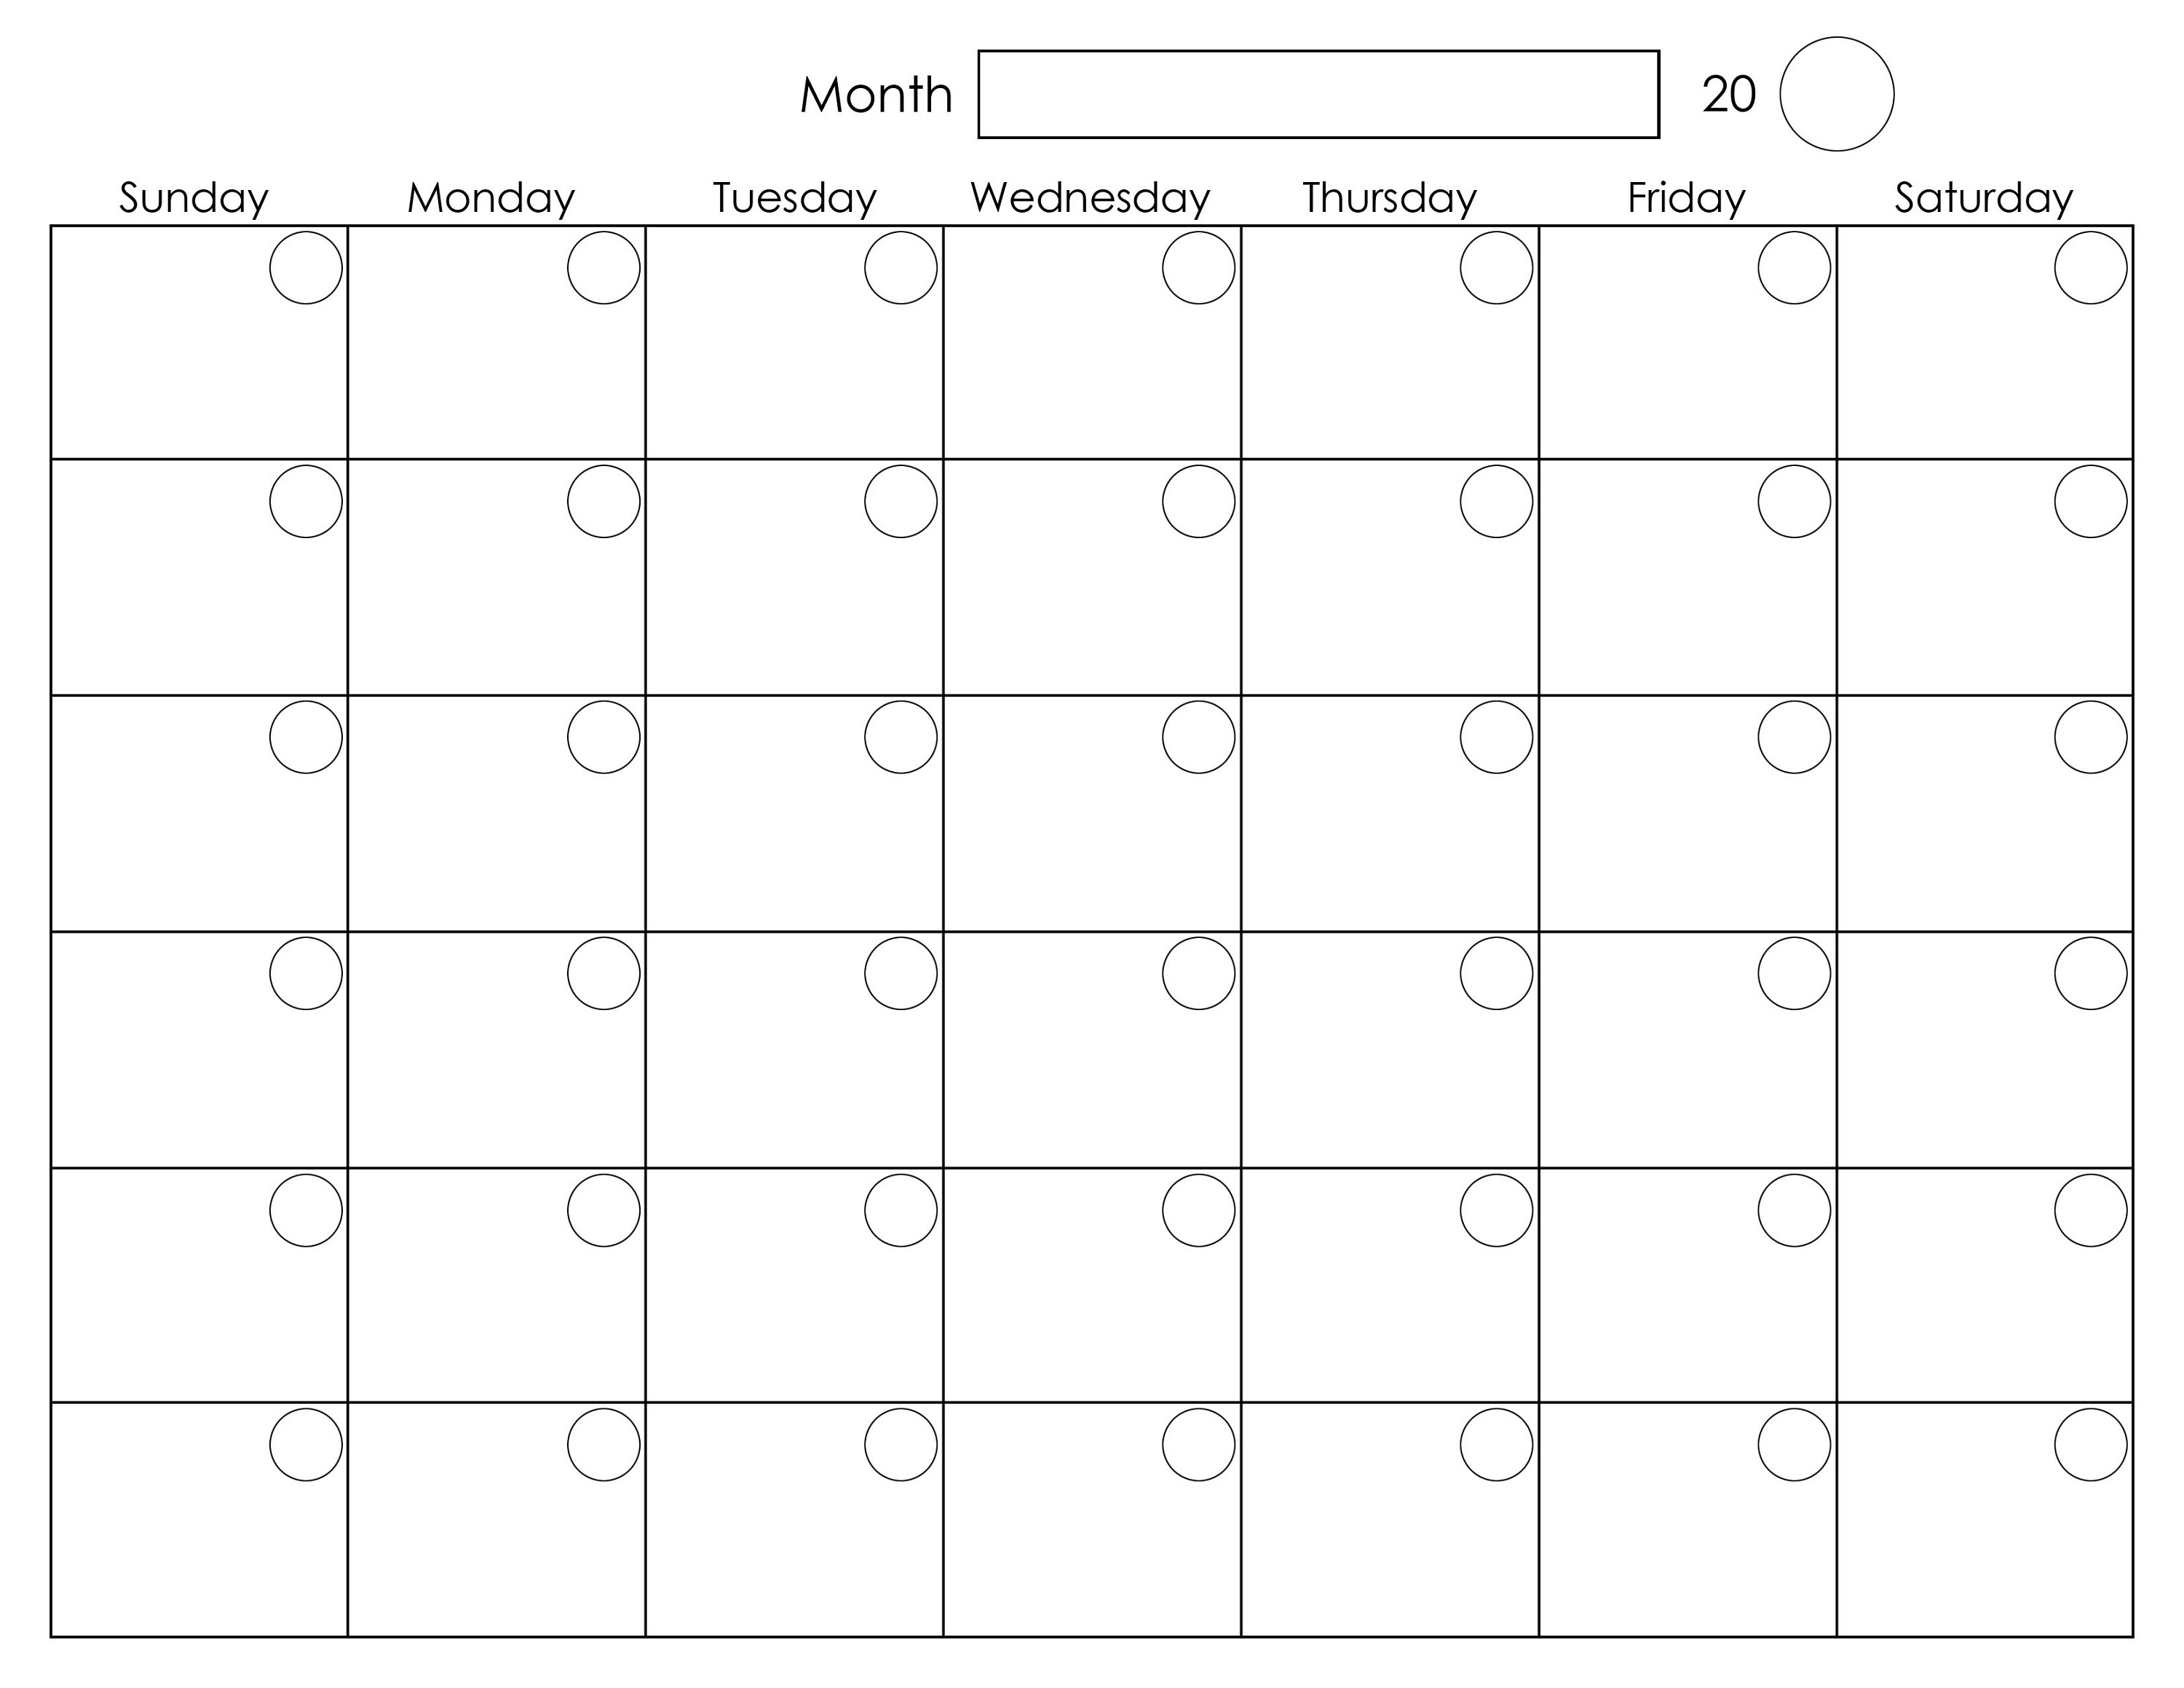 calendar-month-to-print-blank-calendar-pages-blank-calendar-template-blank-monthly-calendars